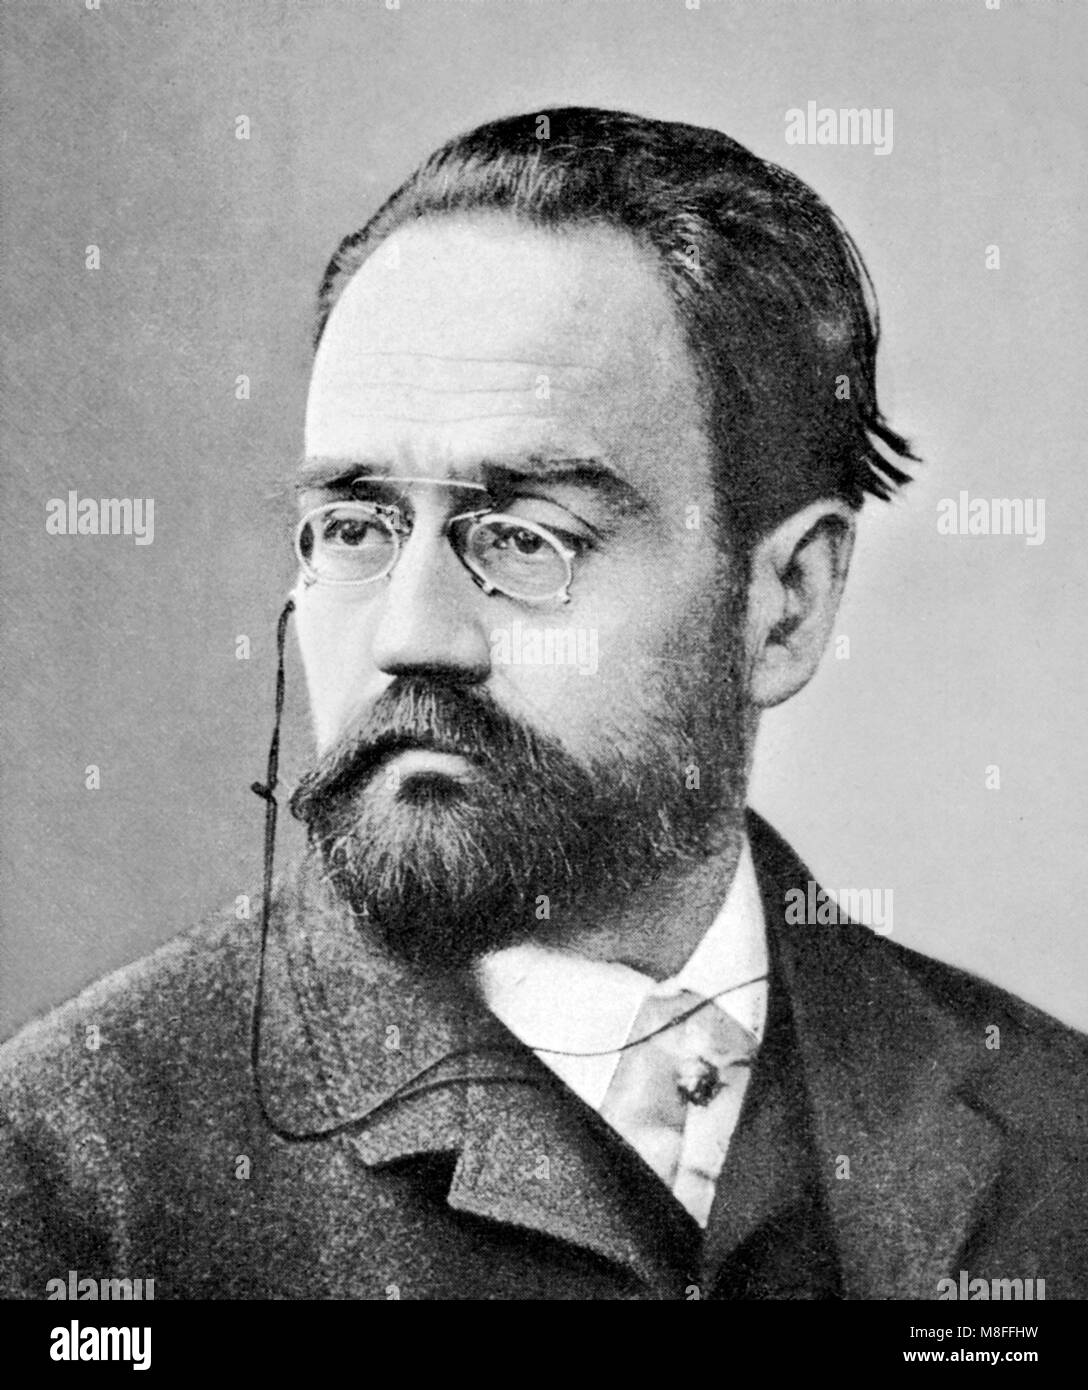 Emile Zola (1840-1902), portrait of the French author by Nadar, c.1881. Stock Photo